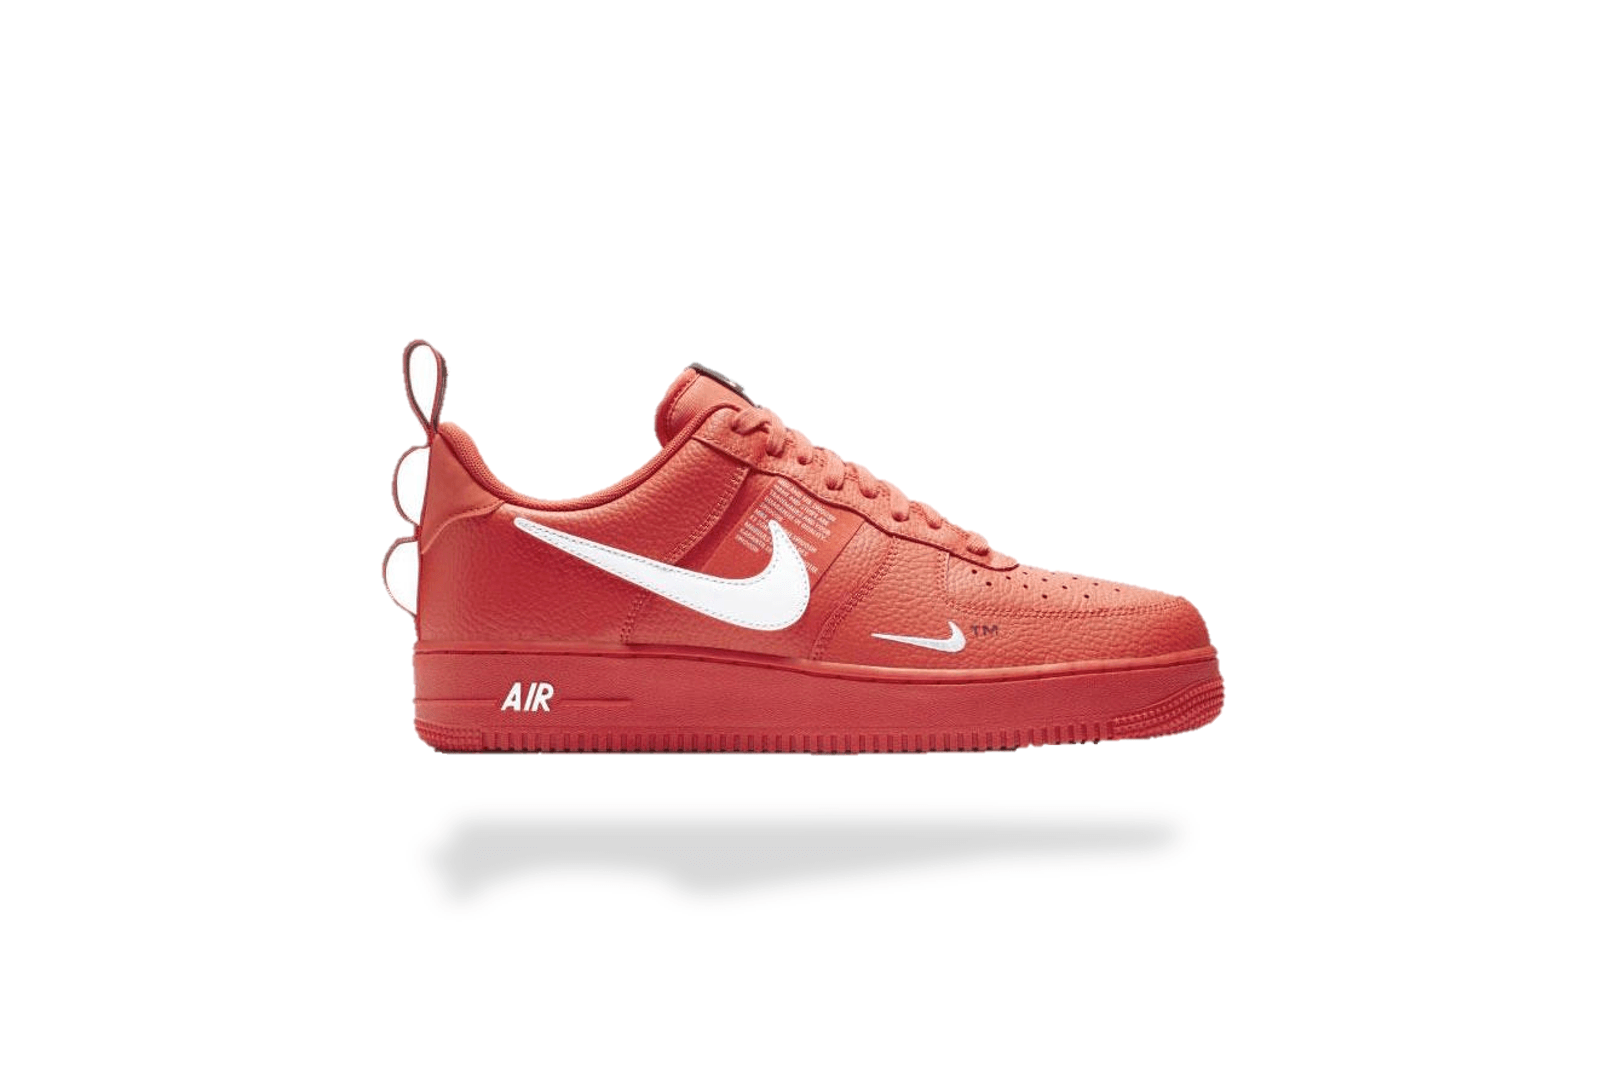 nike air force 1 rouge femme,Nike Air Force 1'07 blanche ...